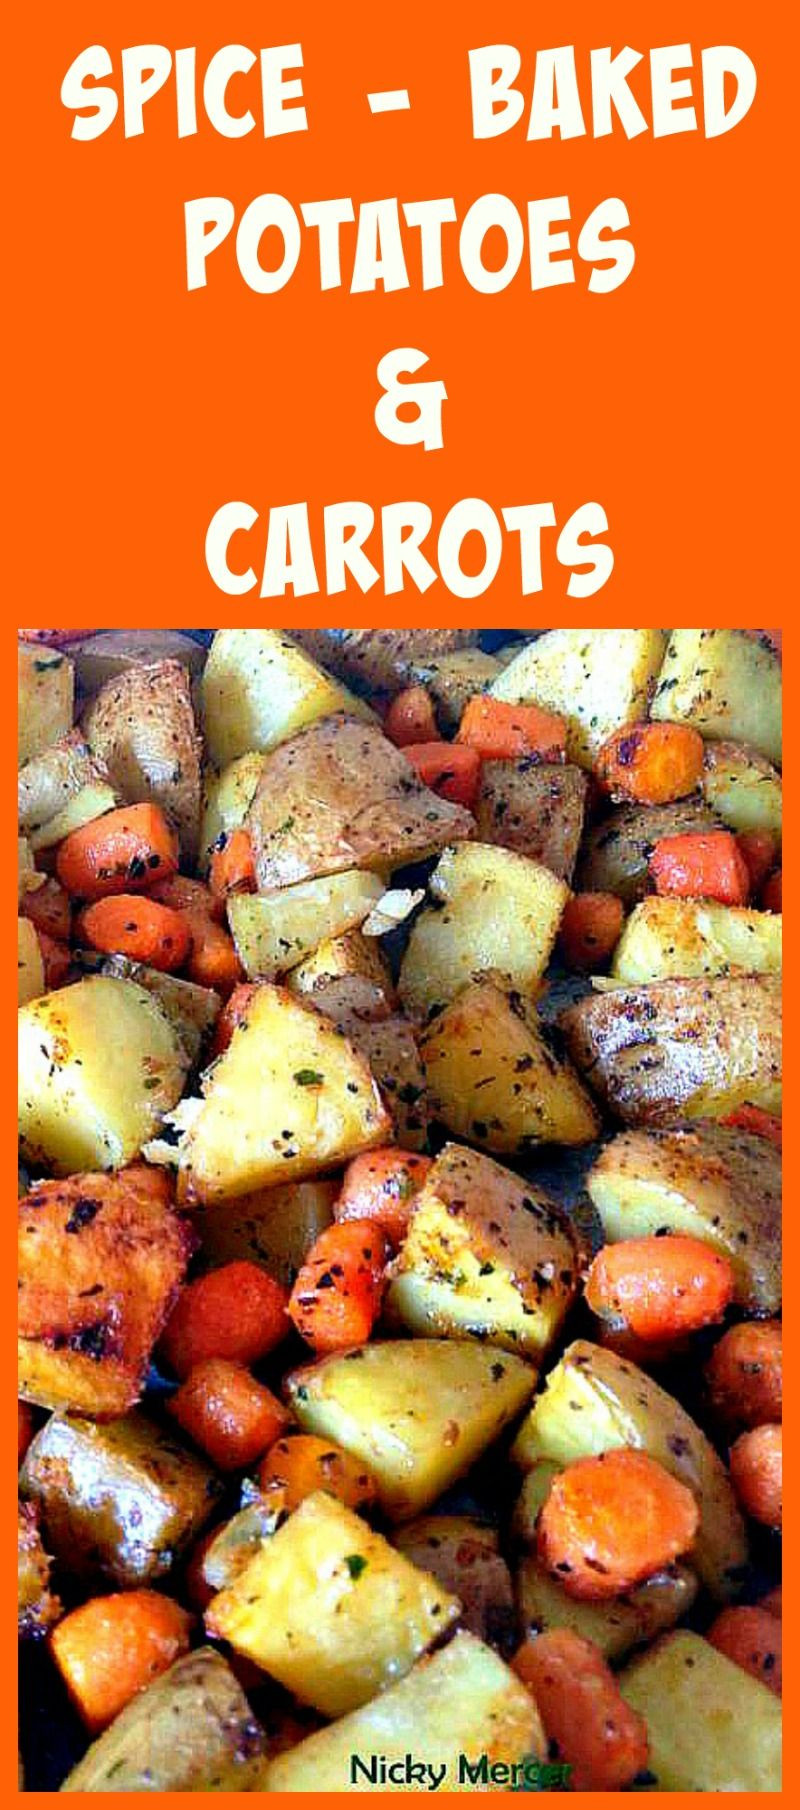 Roasted Baby Potatoes And Carrots
 Spiced Oven Baked Potatoes Baby Carrots A popular